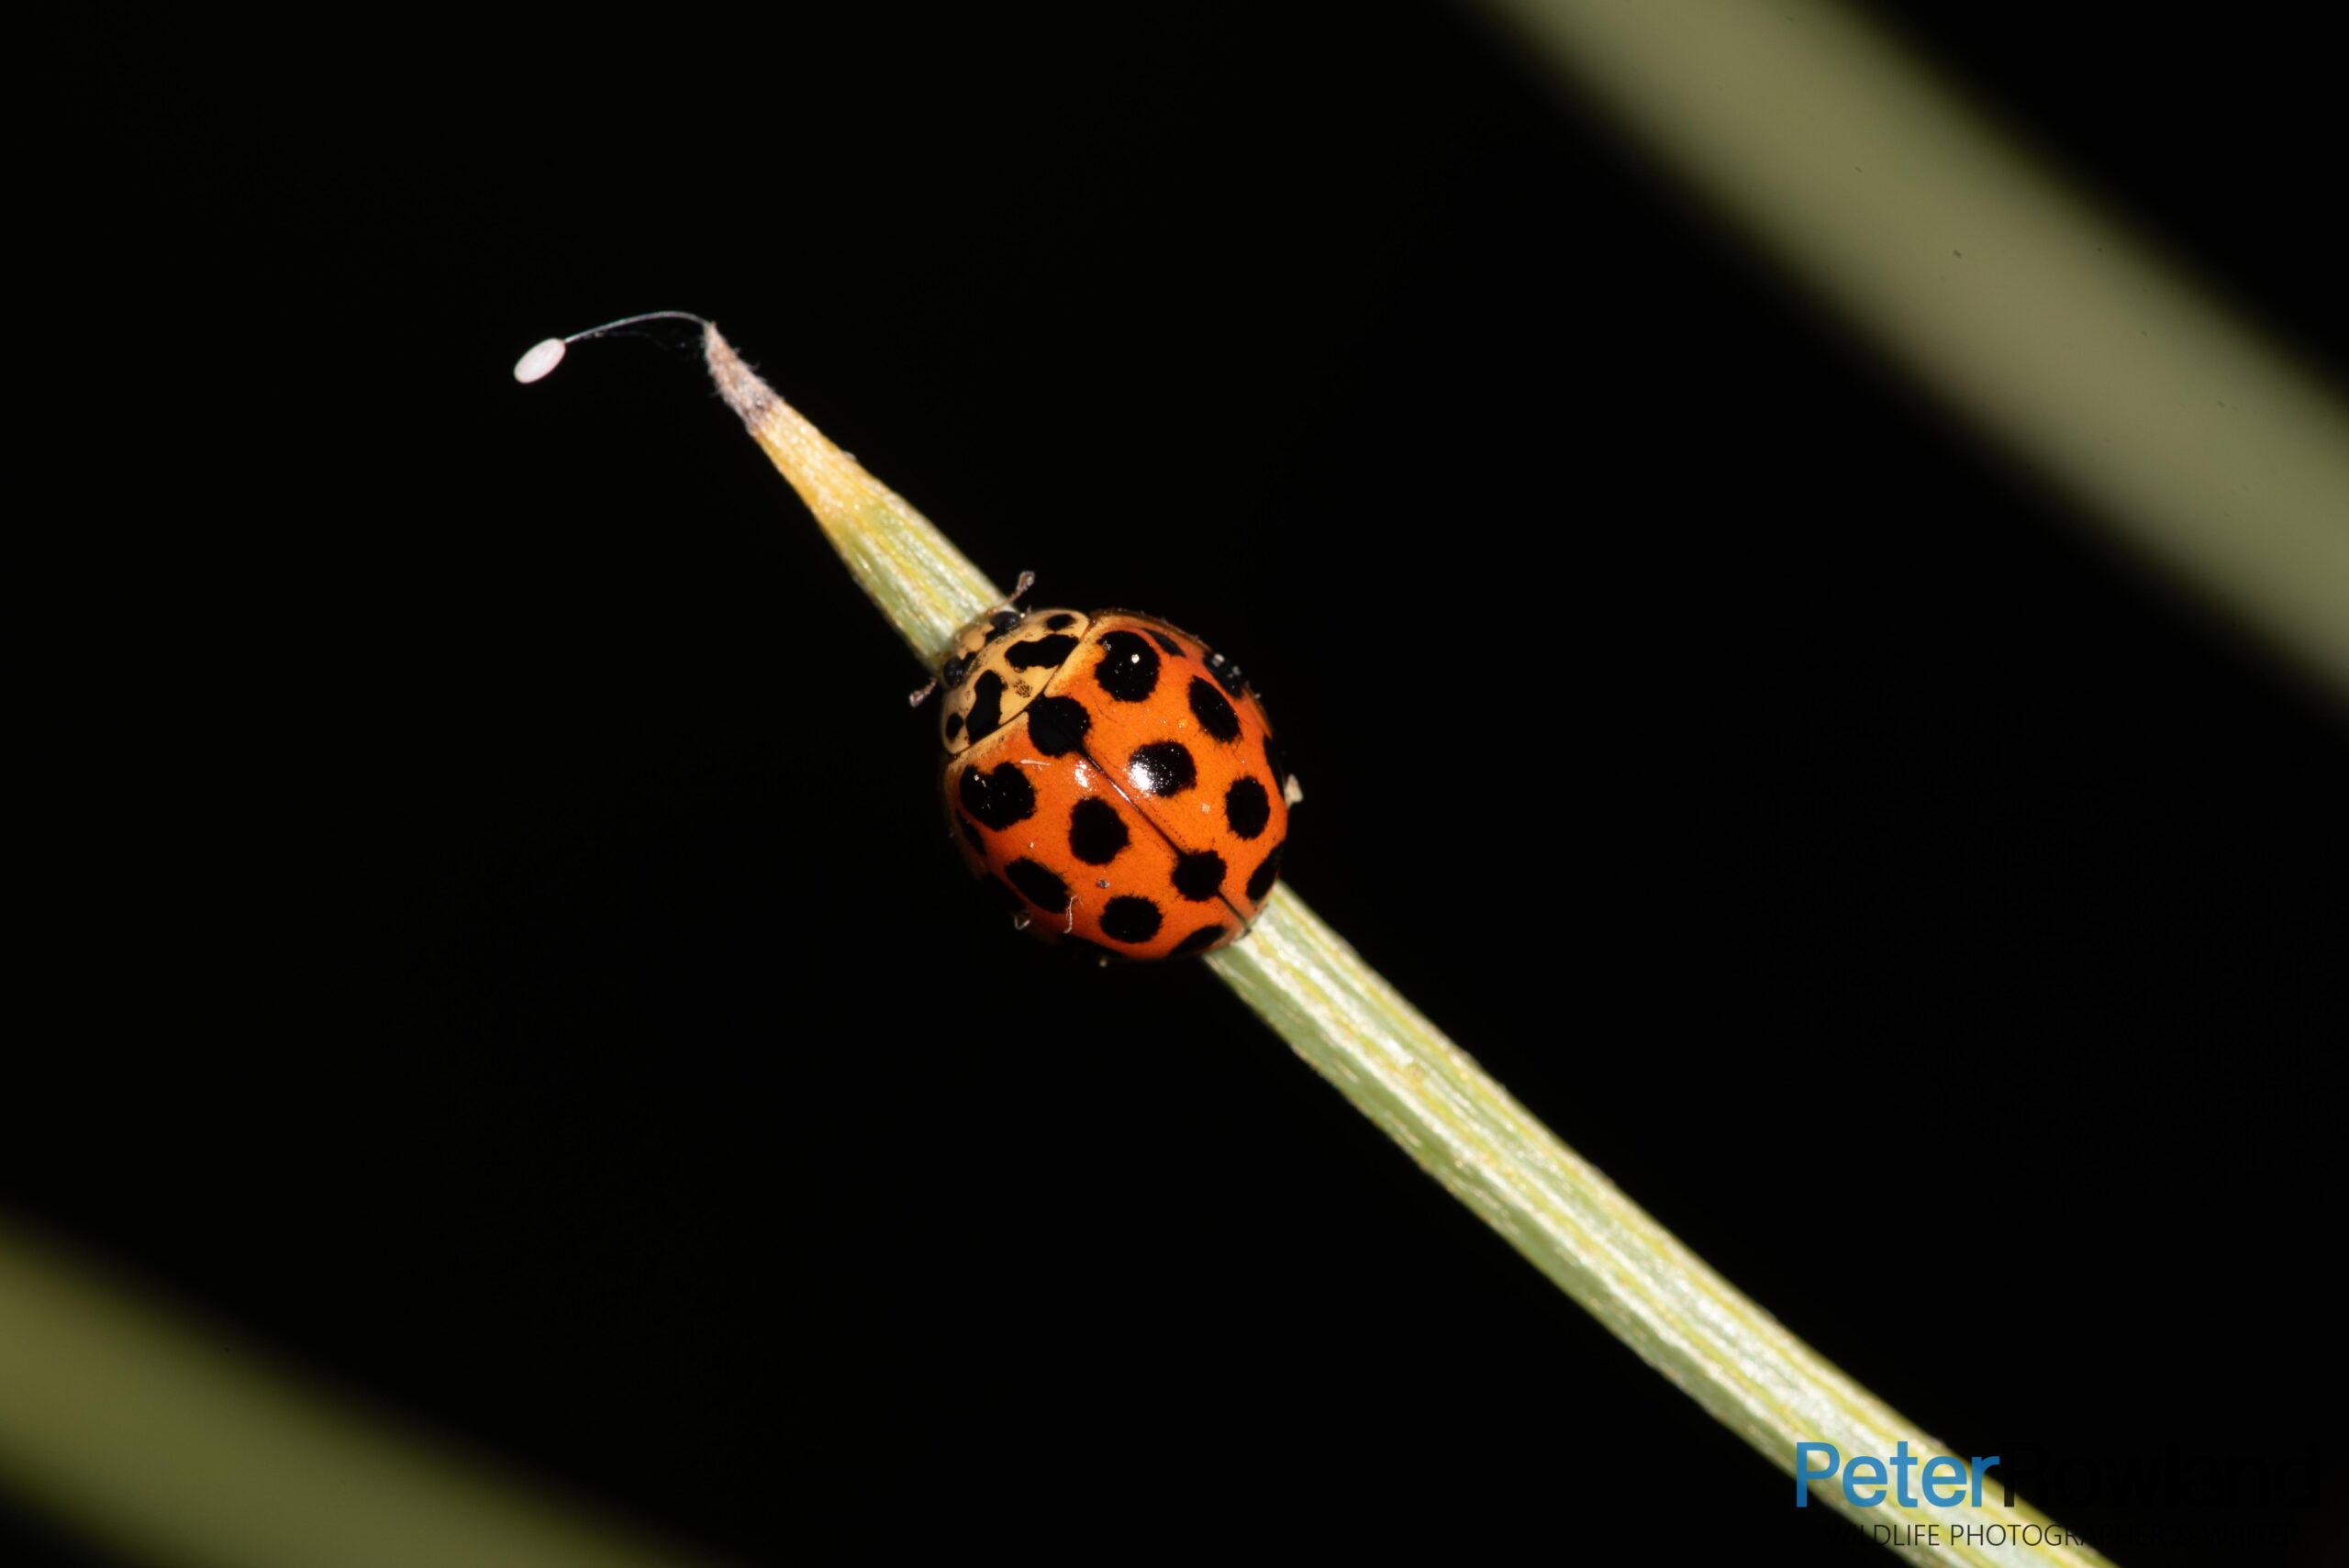 A Common Spotted Ladybird climbing up a thin pine needle